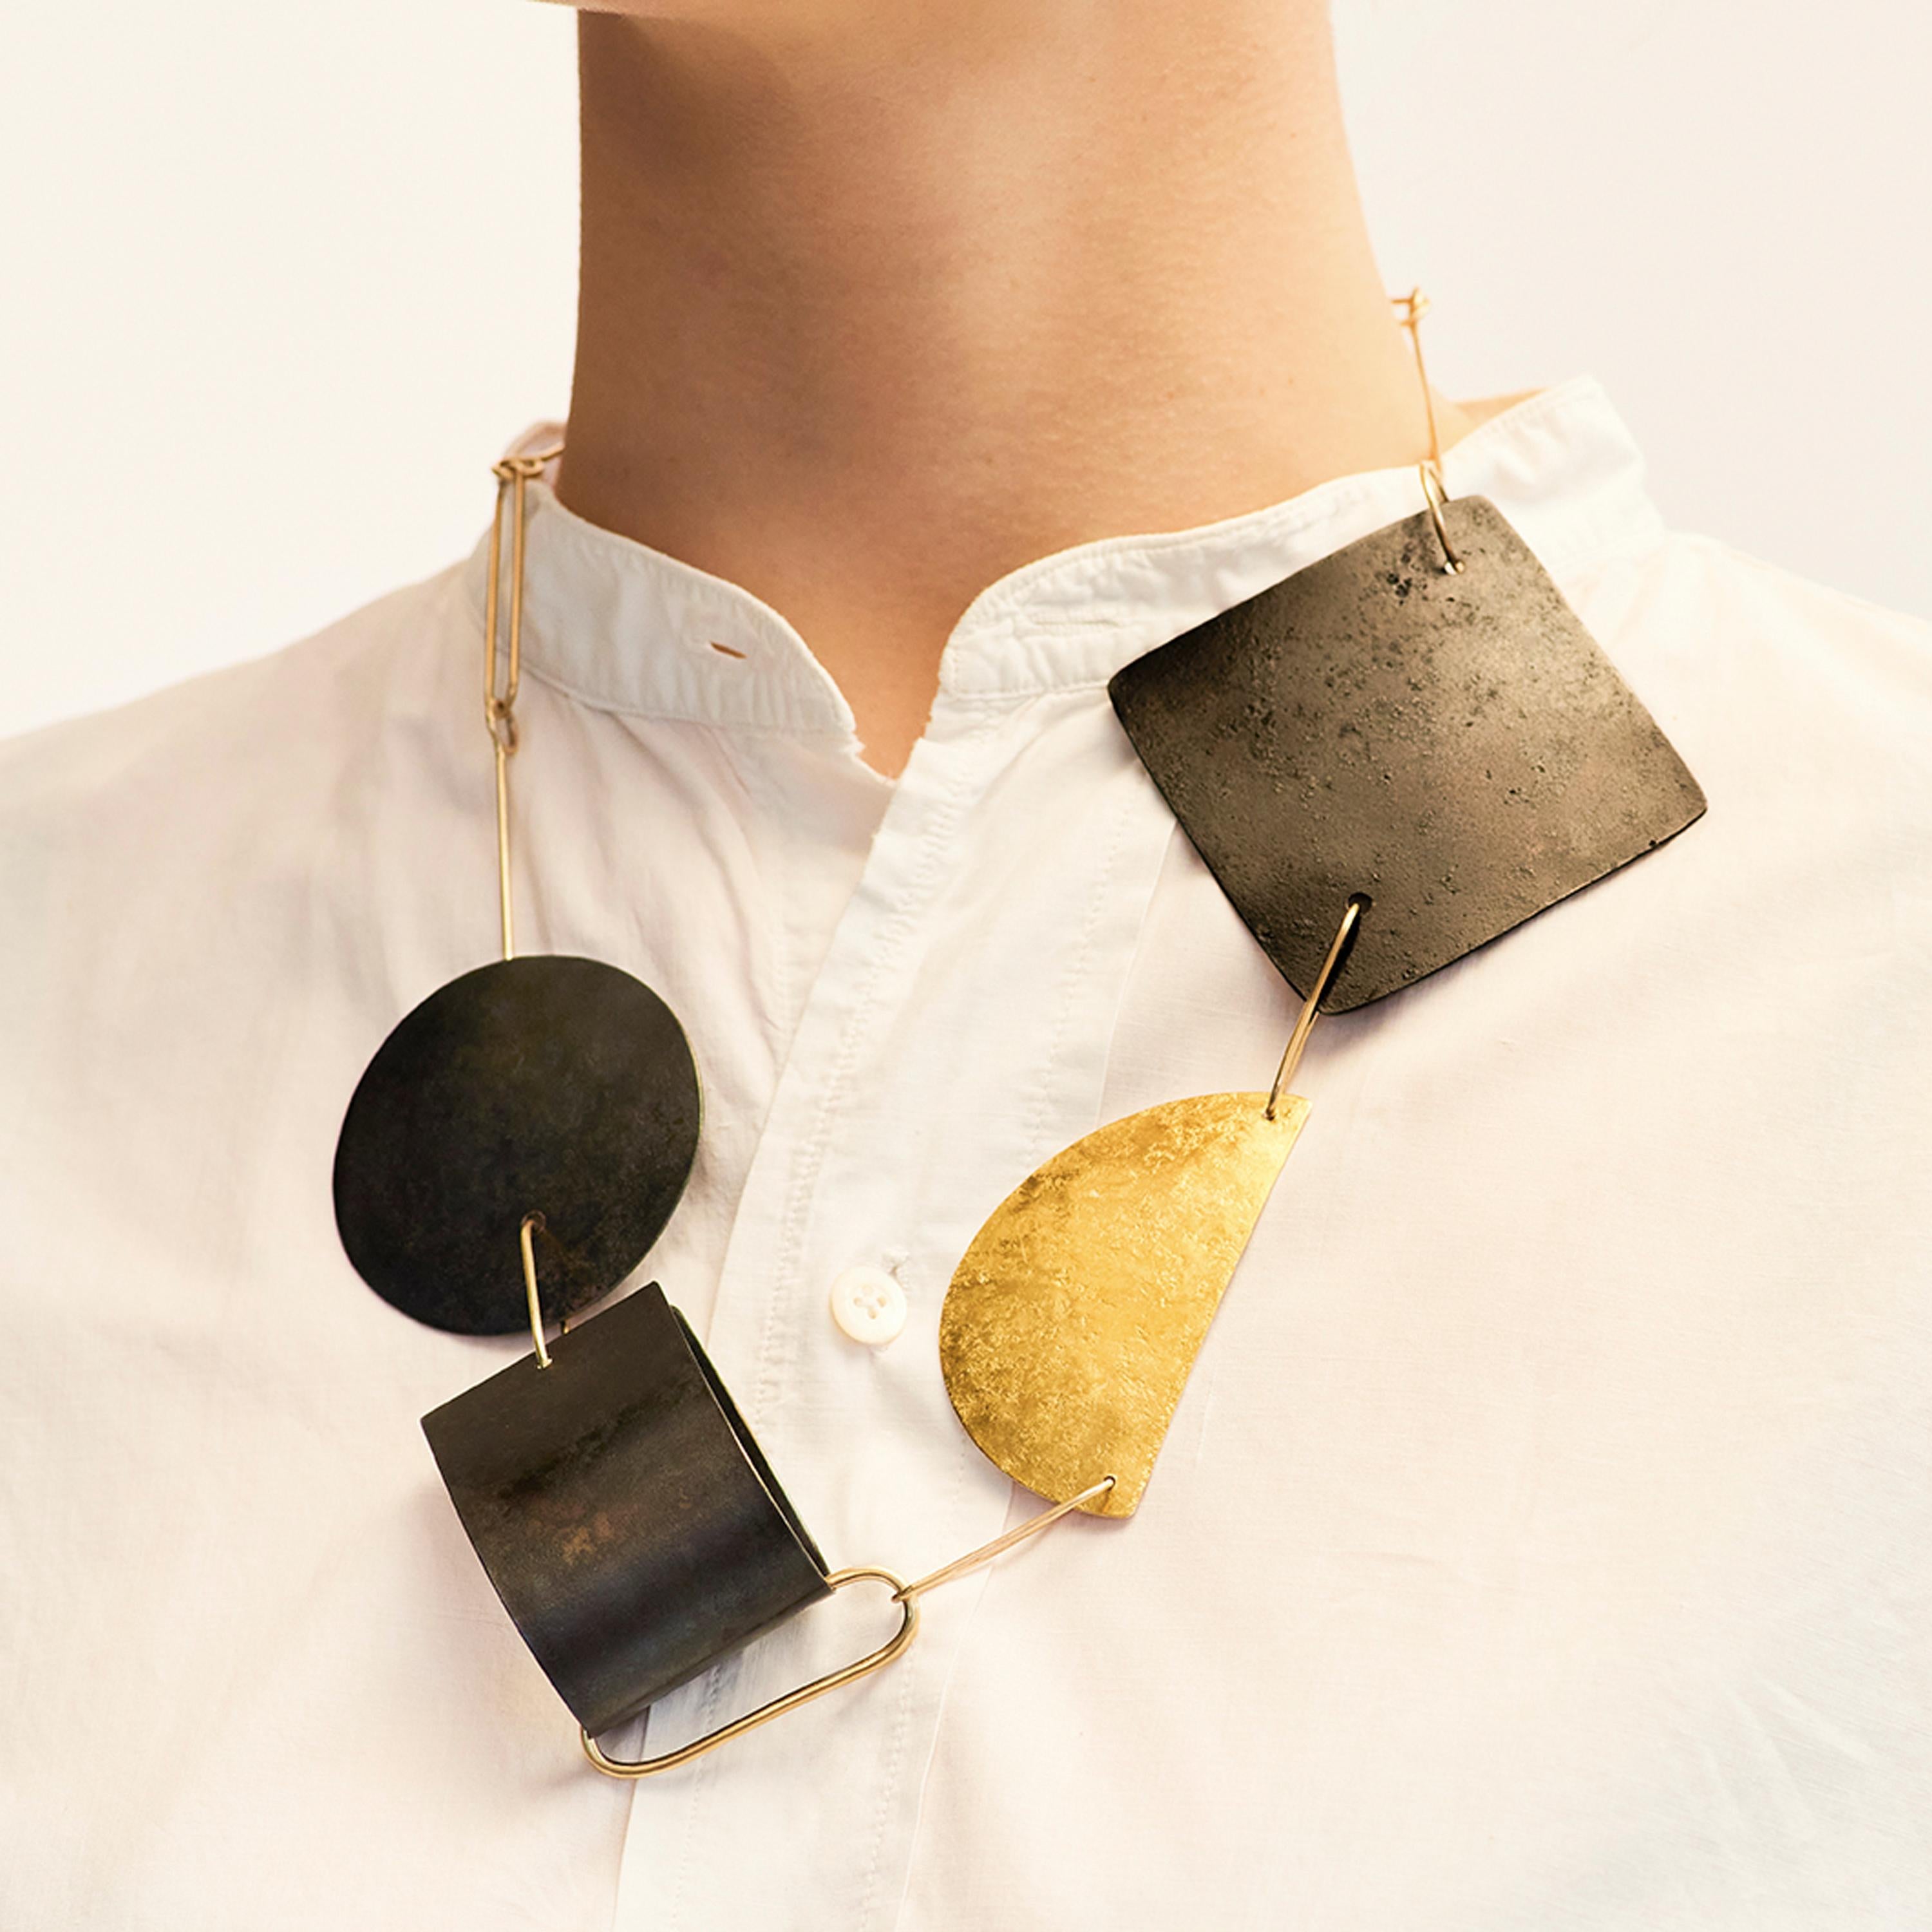 Catherine Le Gal brings together simple forms and combines materials to create her Shapes Necklace. Catherine has hammered the surface of some elements, whilst others are smooth. Three simple black forms created from patinated steel, contrast